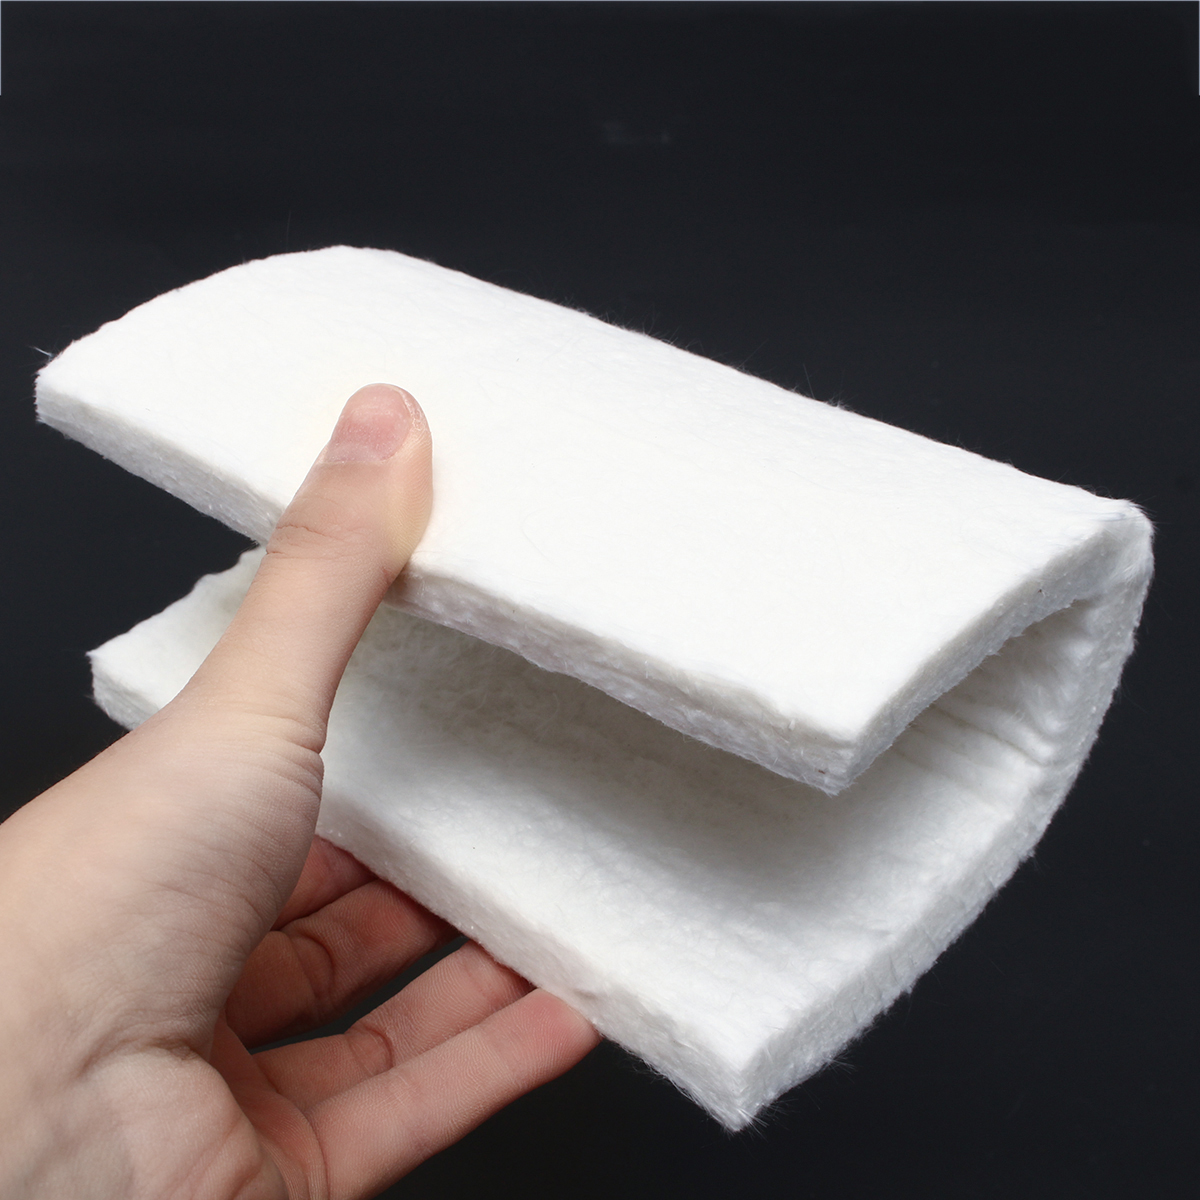 3610mm-Aerogel-Insulation-Hydrophobic-Mat-Foot-Low-to-High-Temp-20x15cm-Water-Pipe-Insulation-Mat-1321399-8